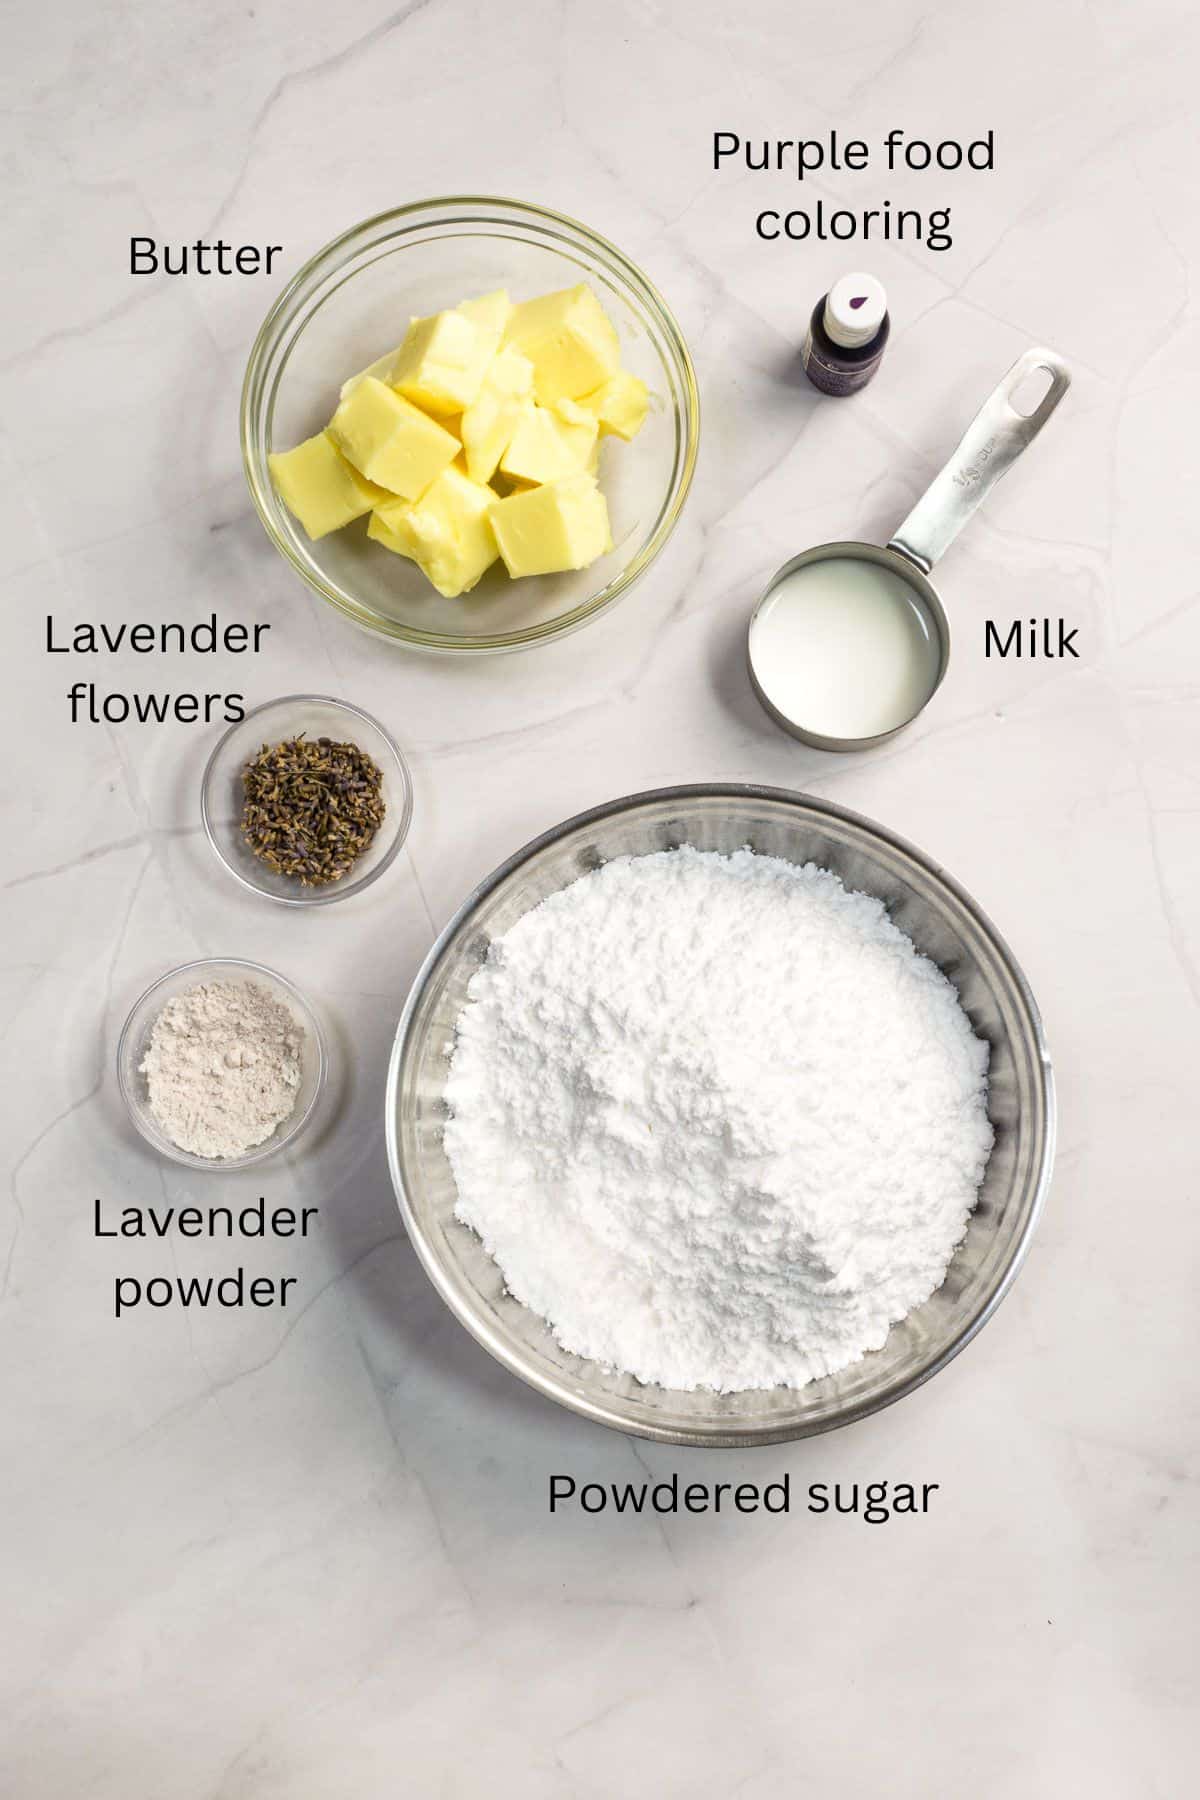 Powdered sugar, butter, lavender buds, lavender powder, purple food coloring and milk in bowls against marble background.